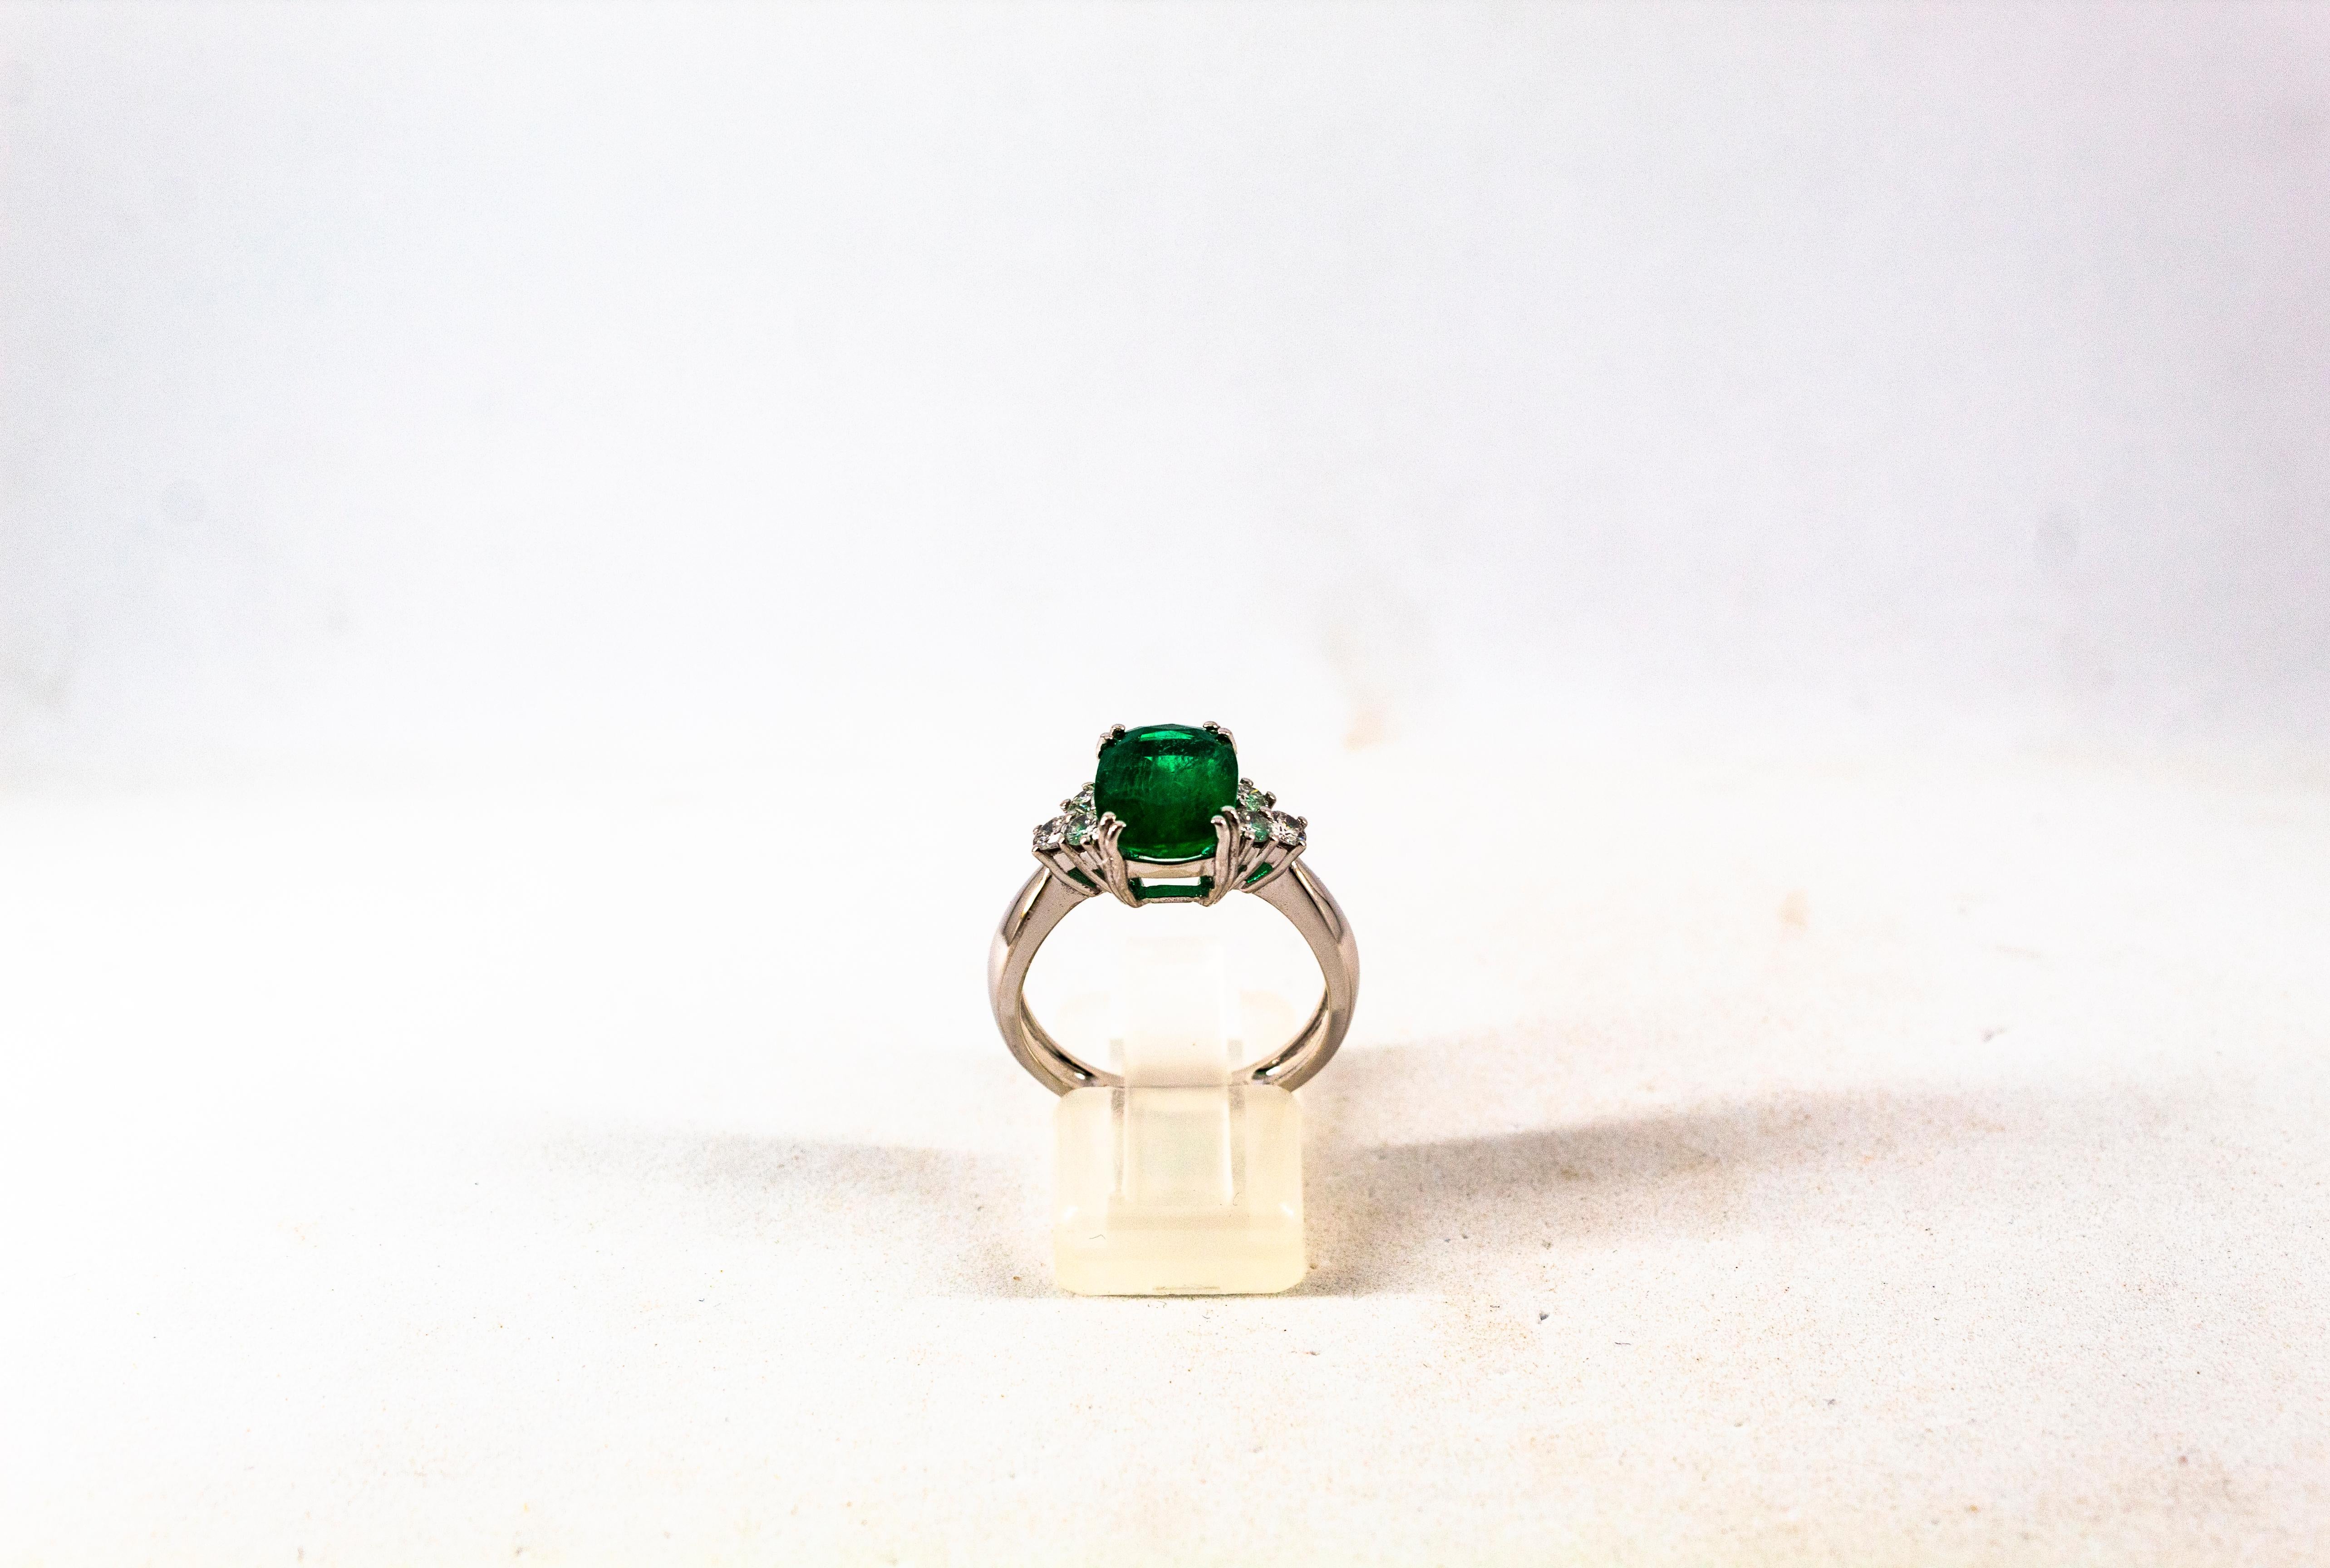 This Ring is made of 18K White Gold.
This Ring has 0.36 Carats of White Brilliant Cut Diamonds. Color: H-G Clarity: VVS1
This Ring has a 3.22 Carats Natural Zambia Cushion Cut Emerald.

This Ring is inspired by Art Deco.

Size ITA: 14.5 USA: